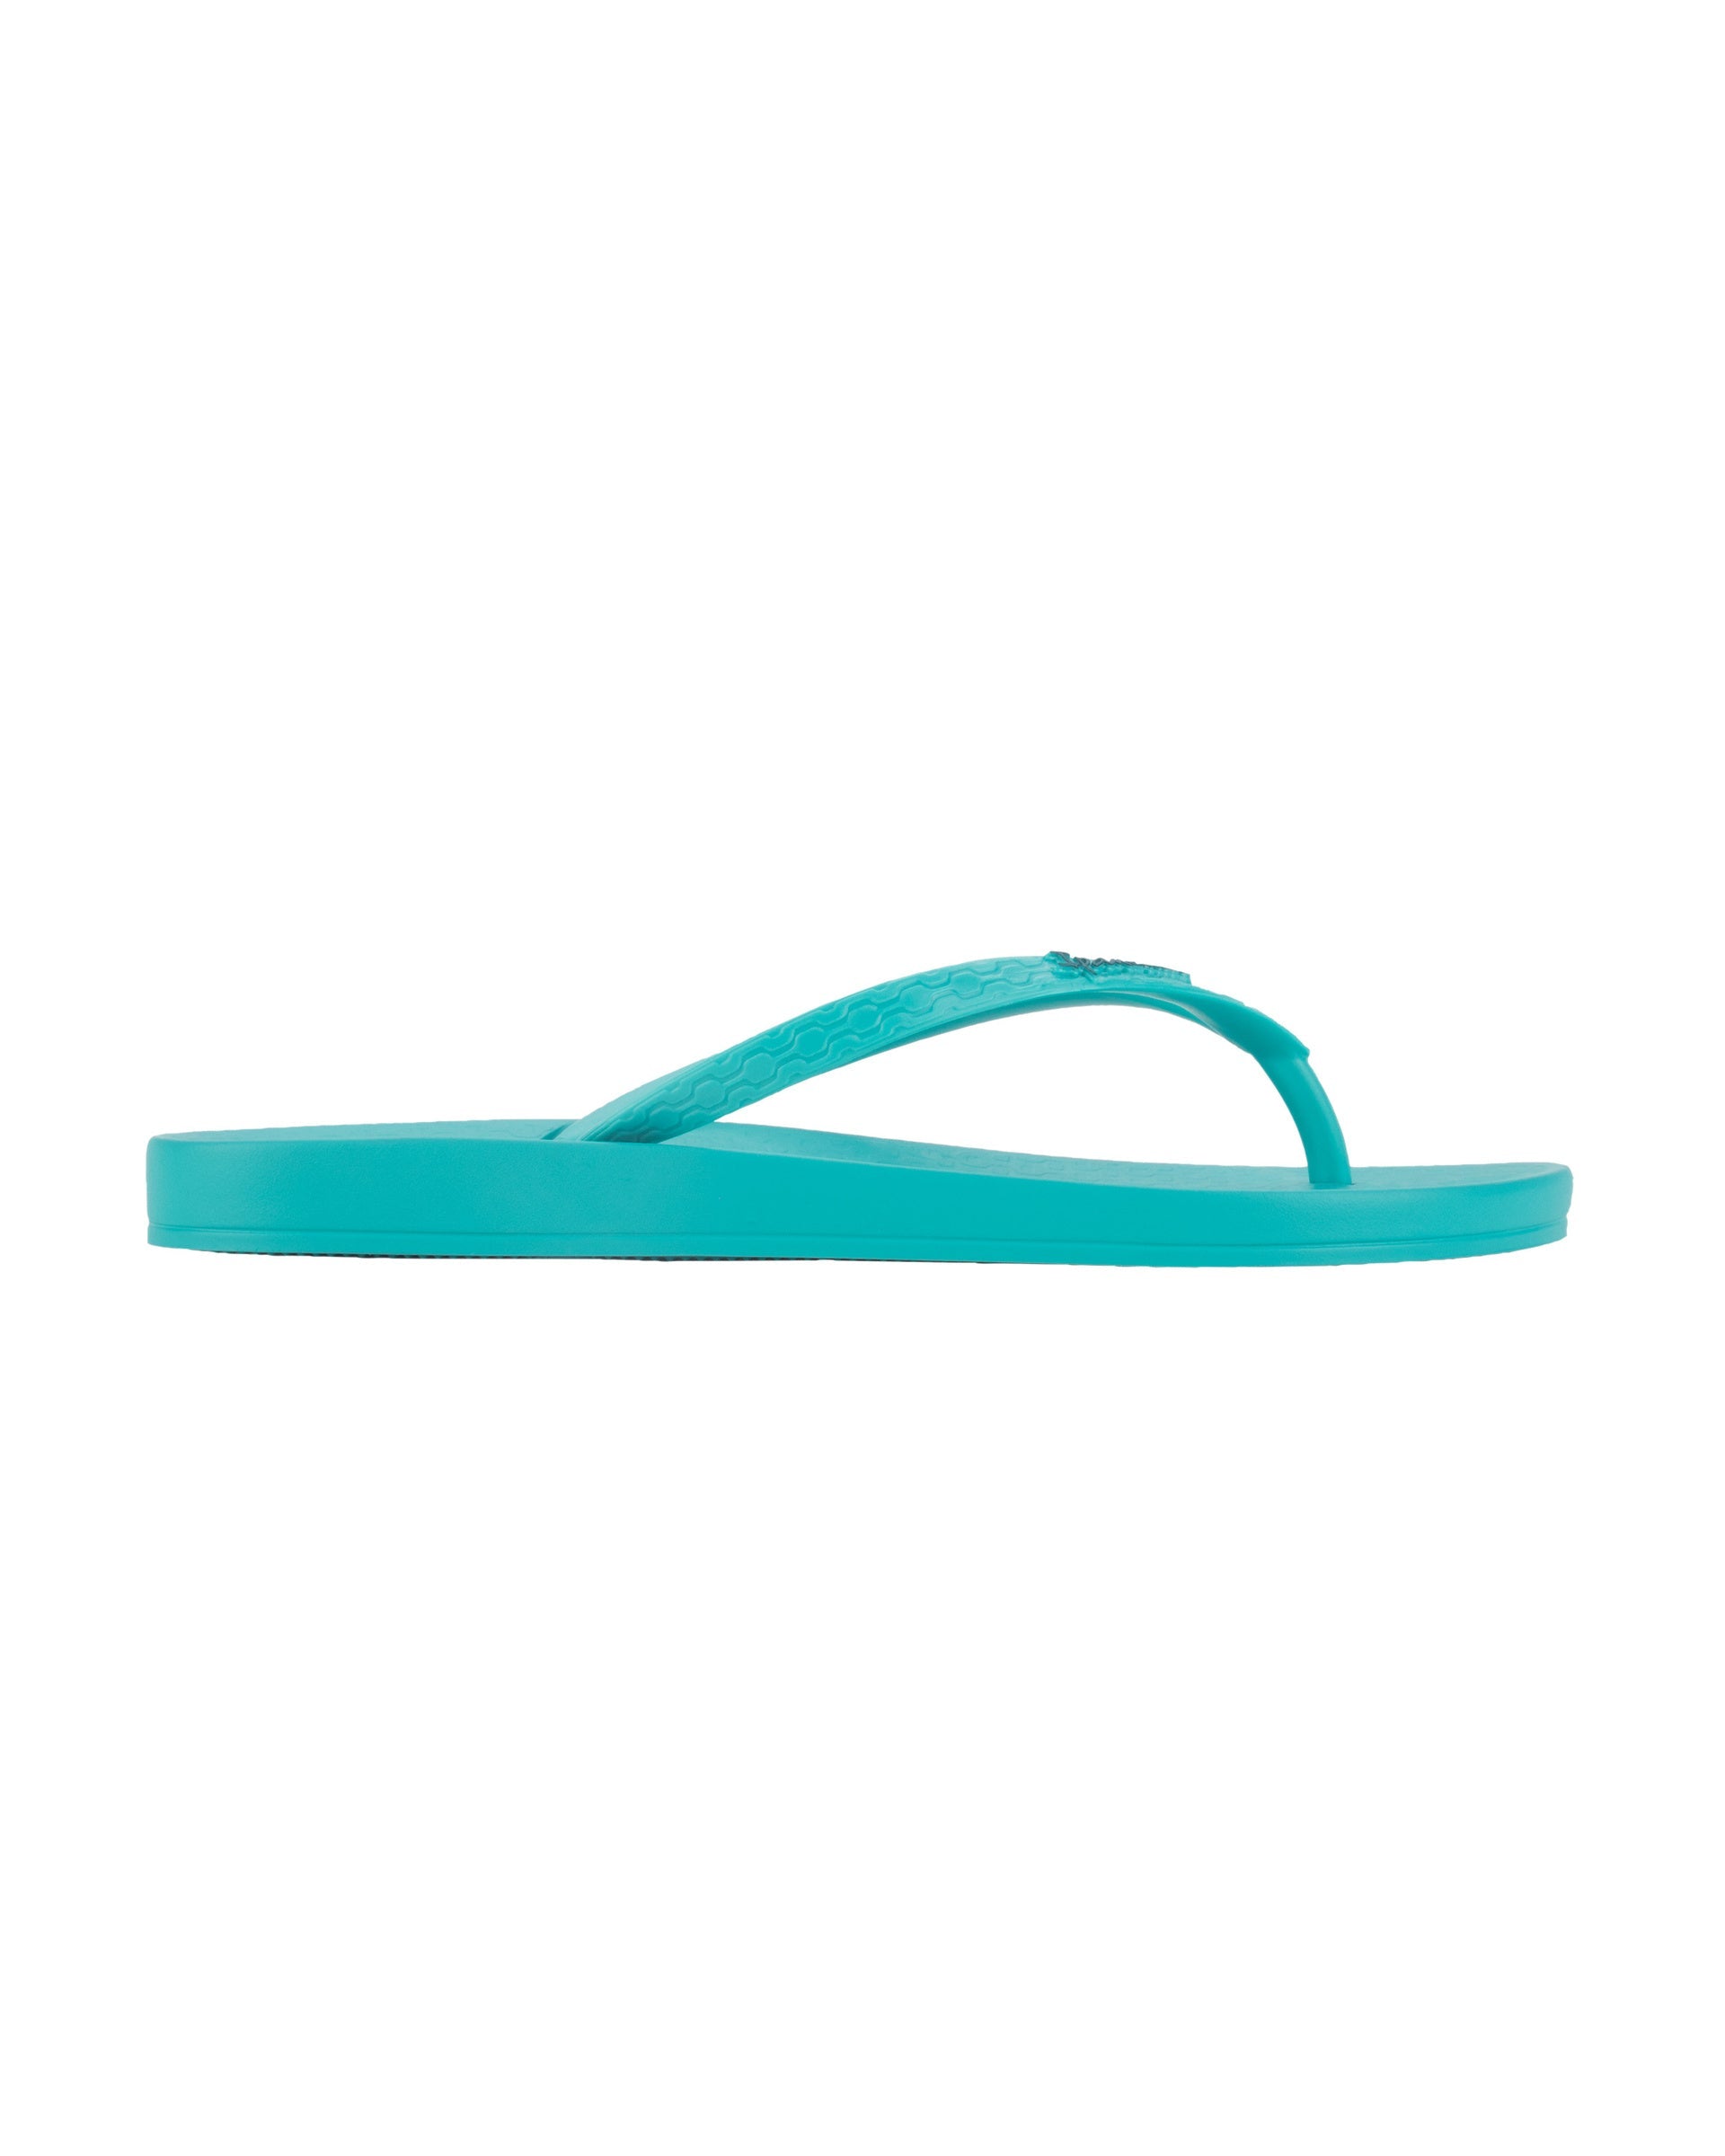 Outer side view of a blue Ipanema Ana Colors women's flip flop.